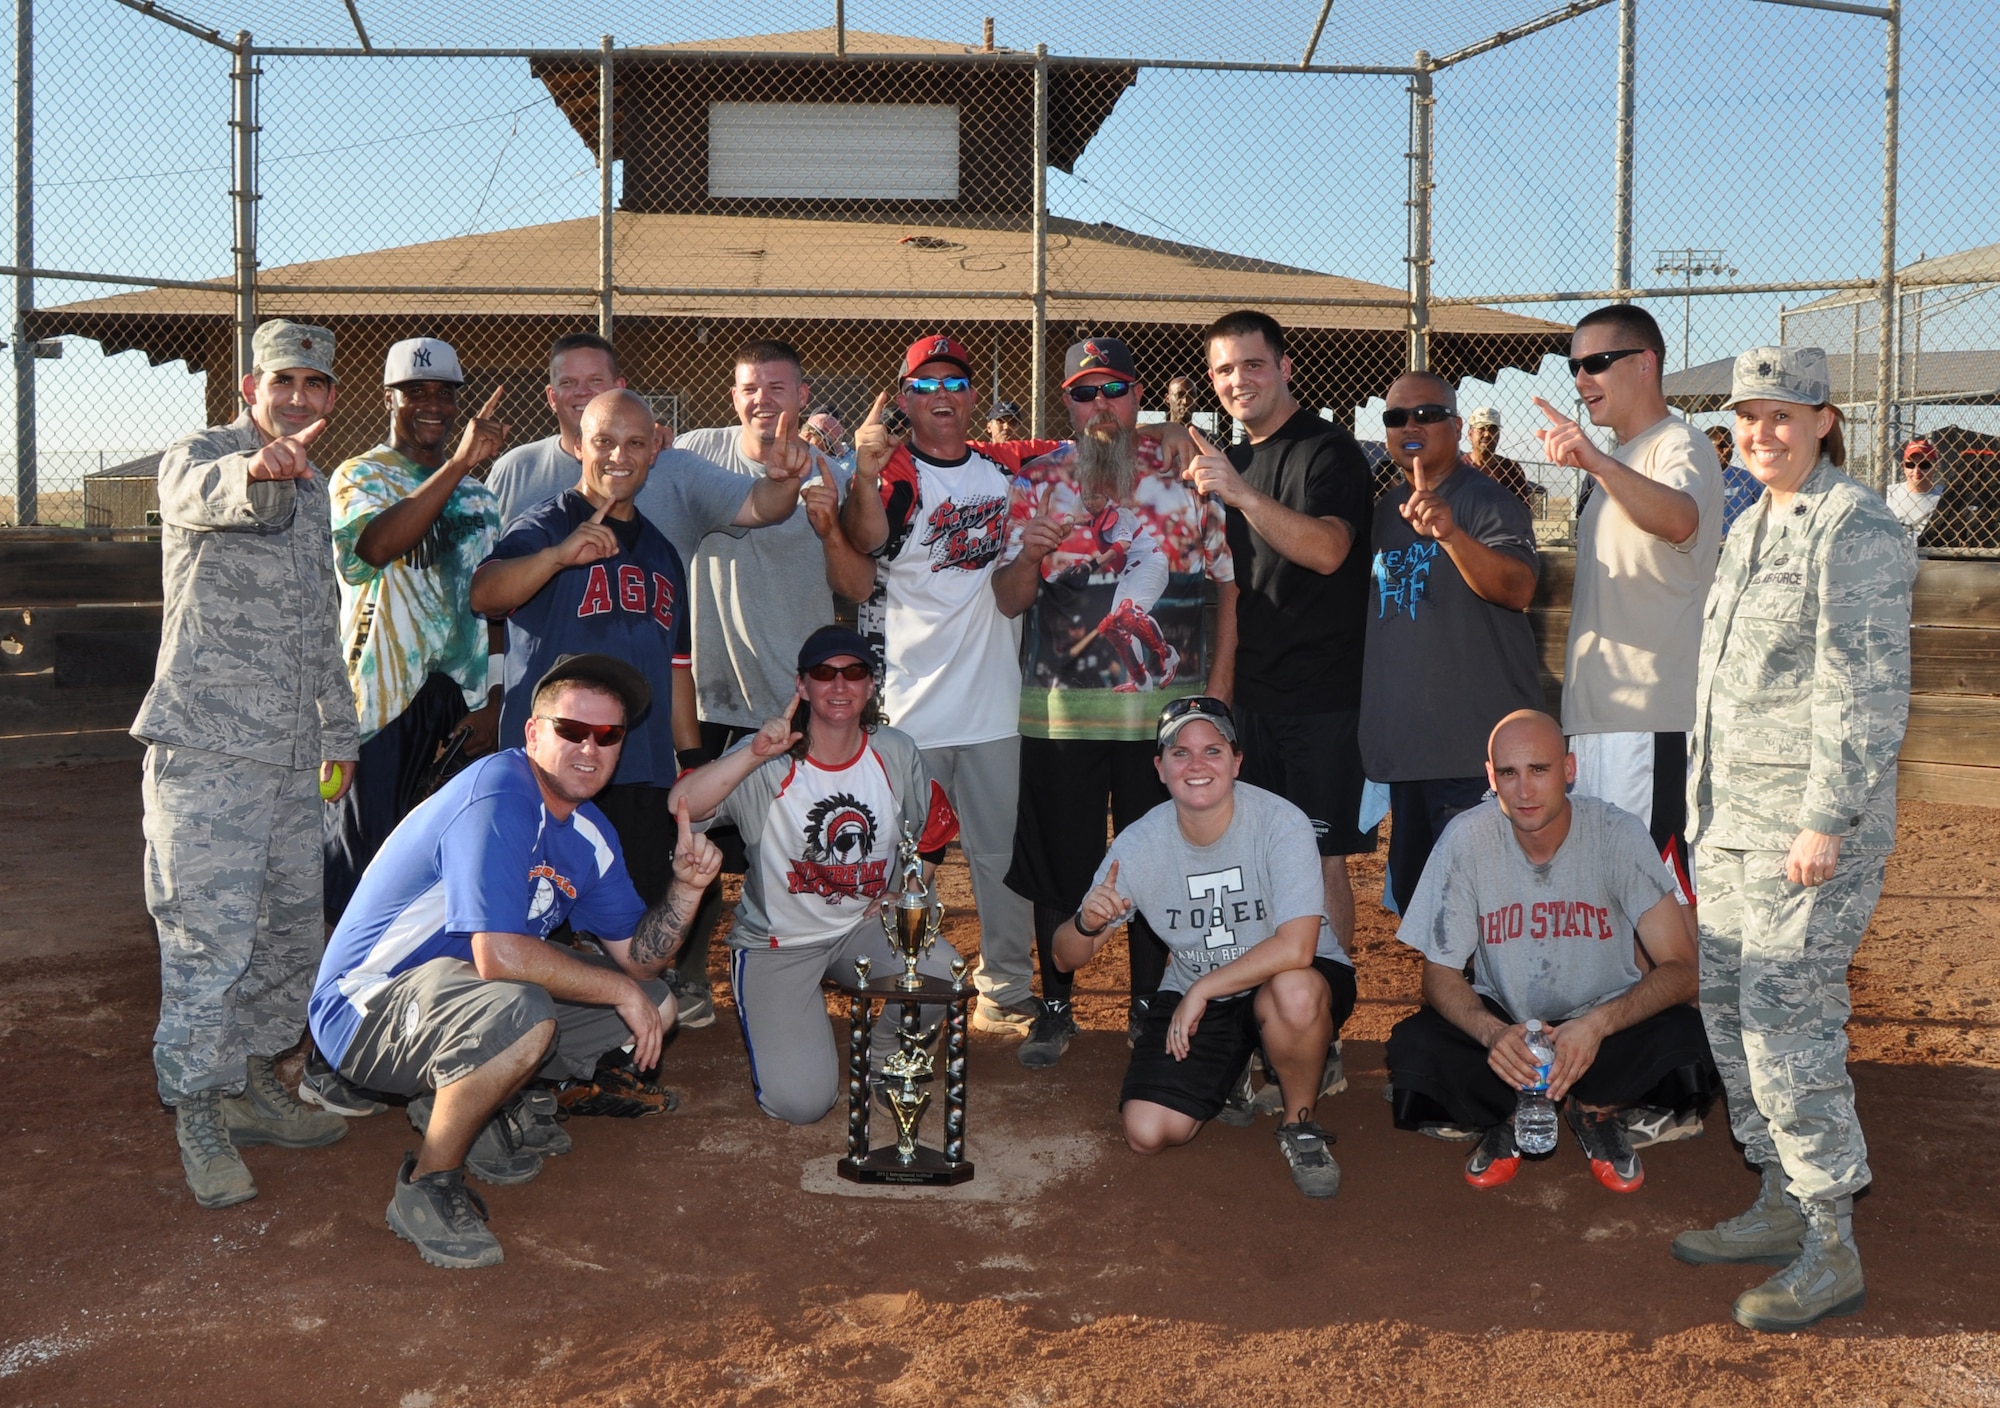 The 9th Maintenance Squadron Intramural Softball Team poses for a picture at the conclusion of Beale’s Intramural Softball Championships at Beale Air Force Base, Calif., Aug. 16, 2012. The 9th MXS defeated the 9th Munitions Squadron with a 10-9 victory. (U.S Air Force photo by Staff Sgt. Robert M. Trujillo)